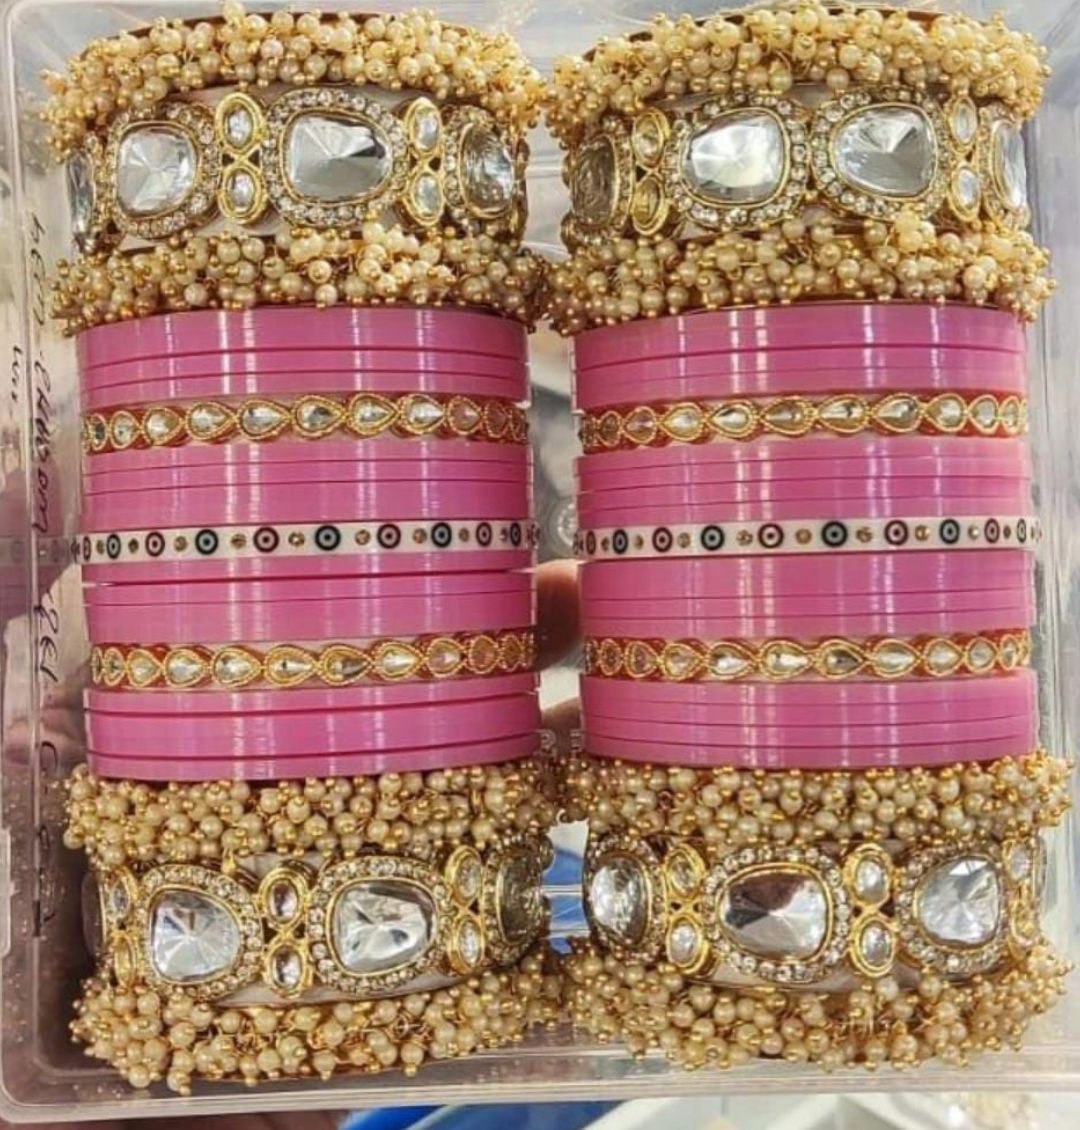 Buy Colored Bangles Online at India Trend – Indiatrendshop